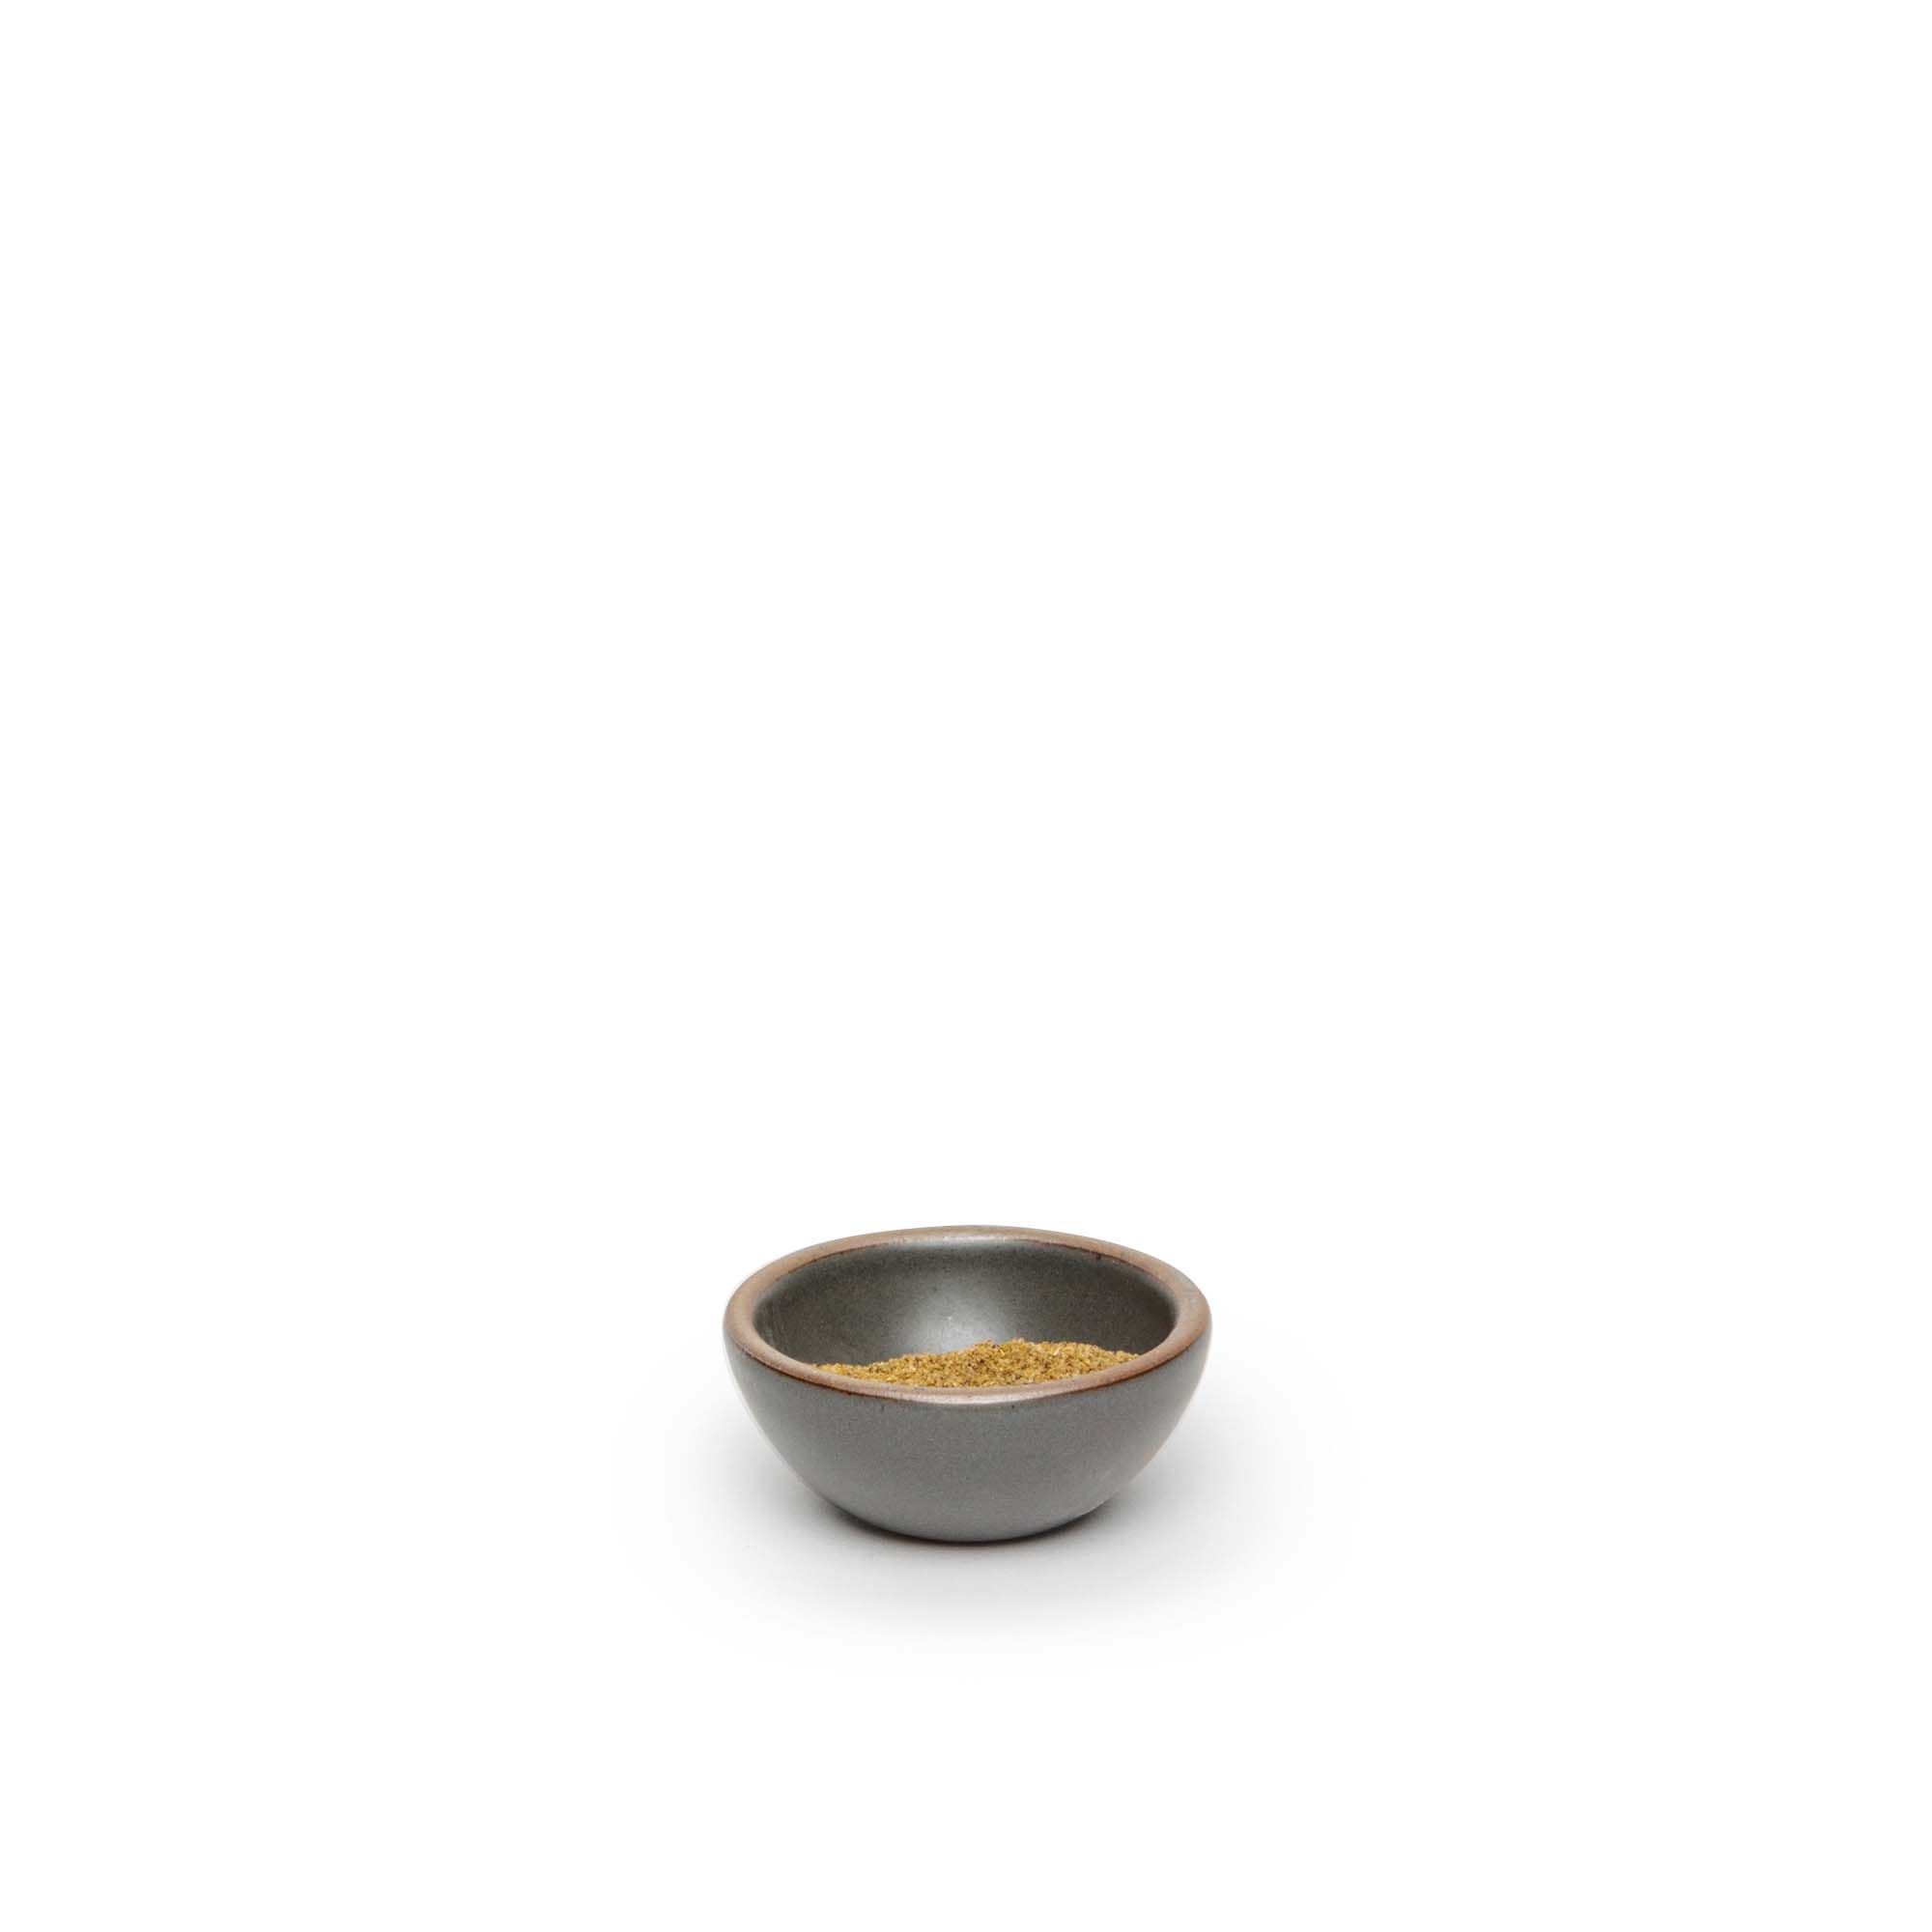 A tiny rounded ceramic bowl in a cool, medium grey color featuring iron speckles and an unglazed rim, filled with seasoning